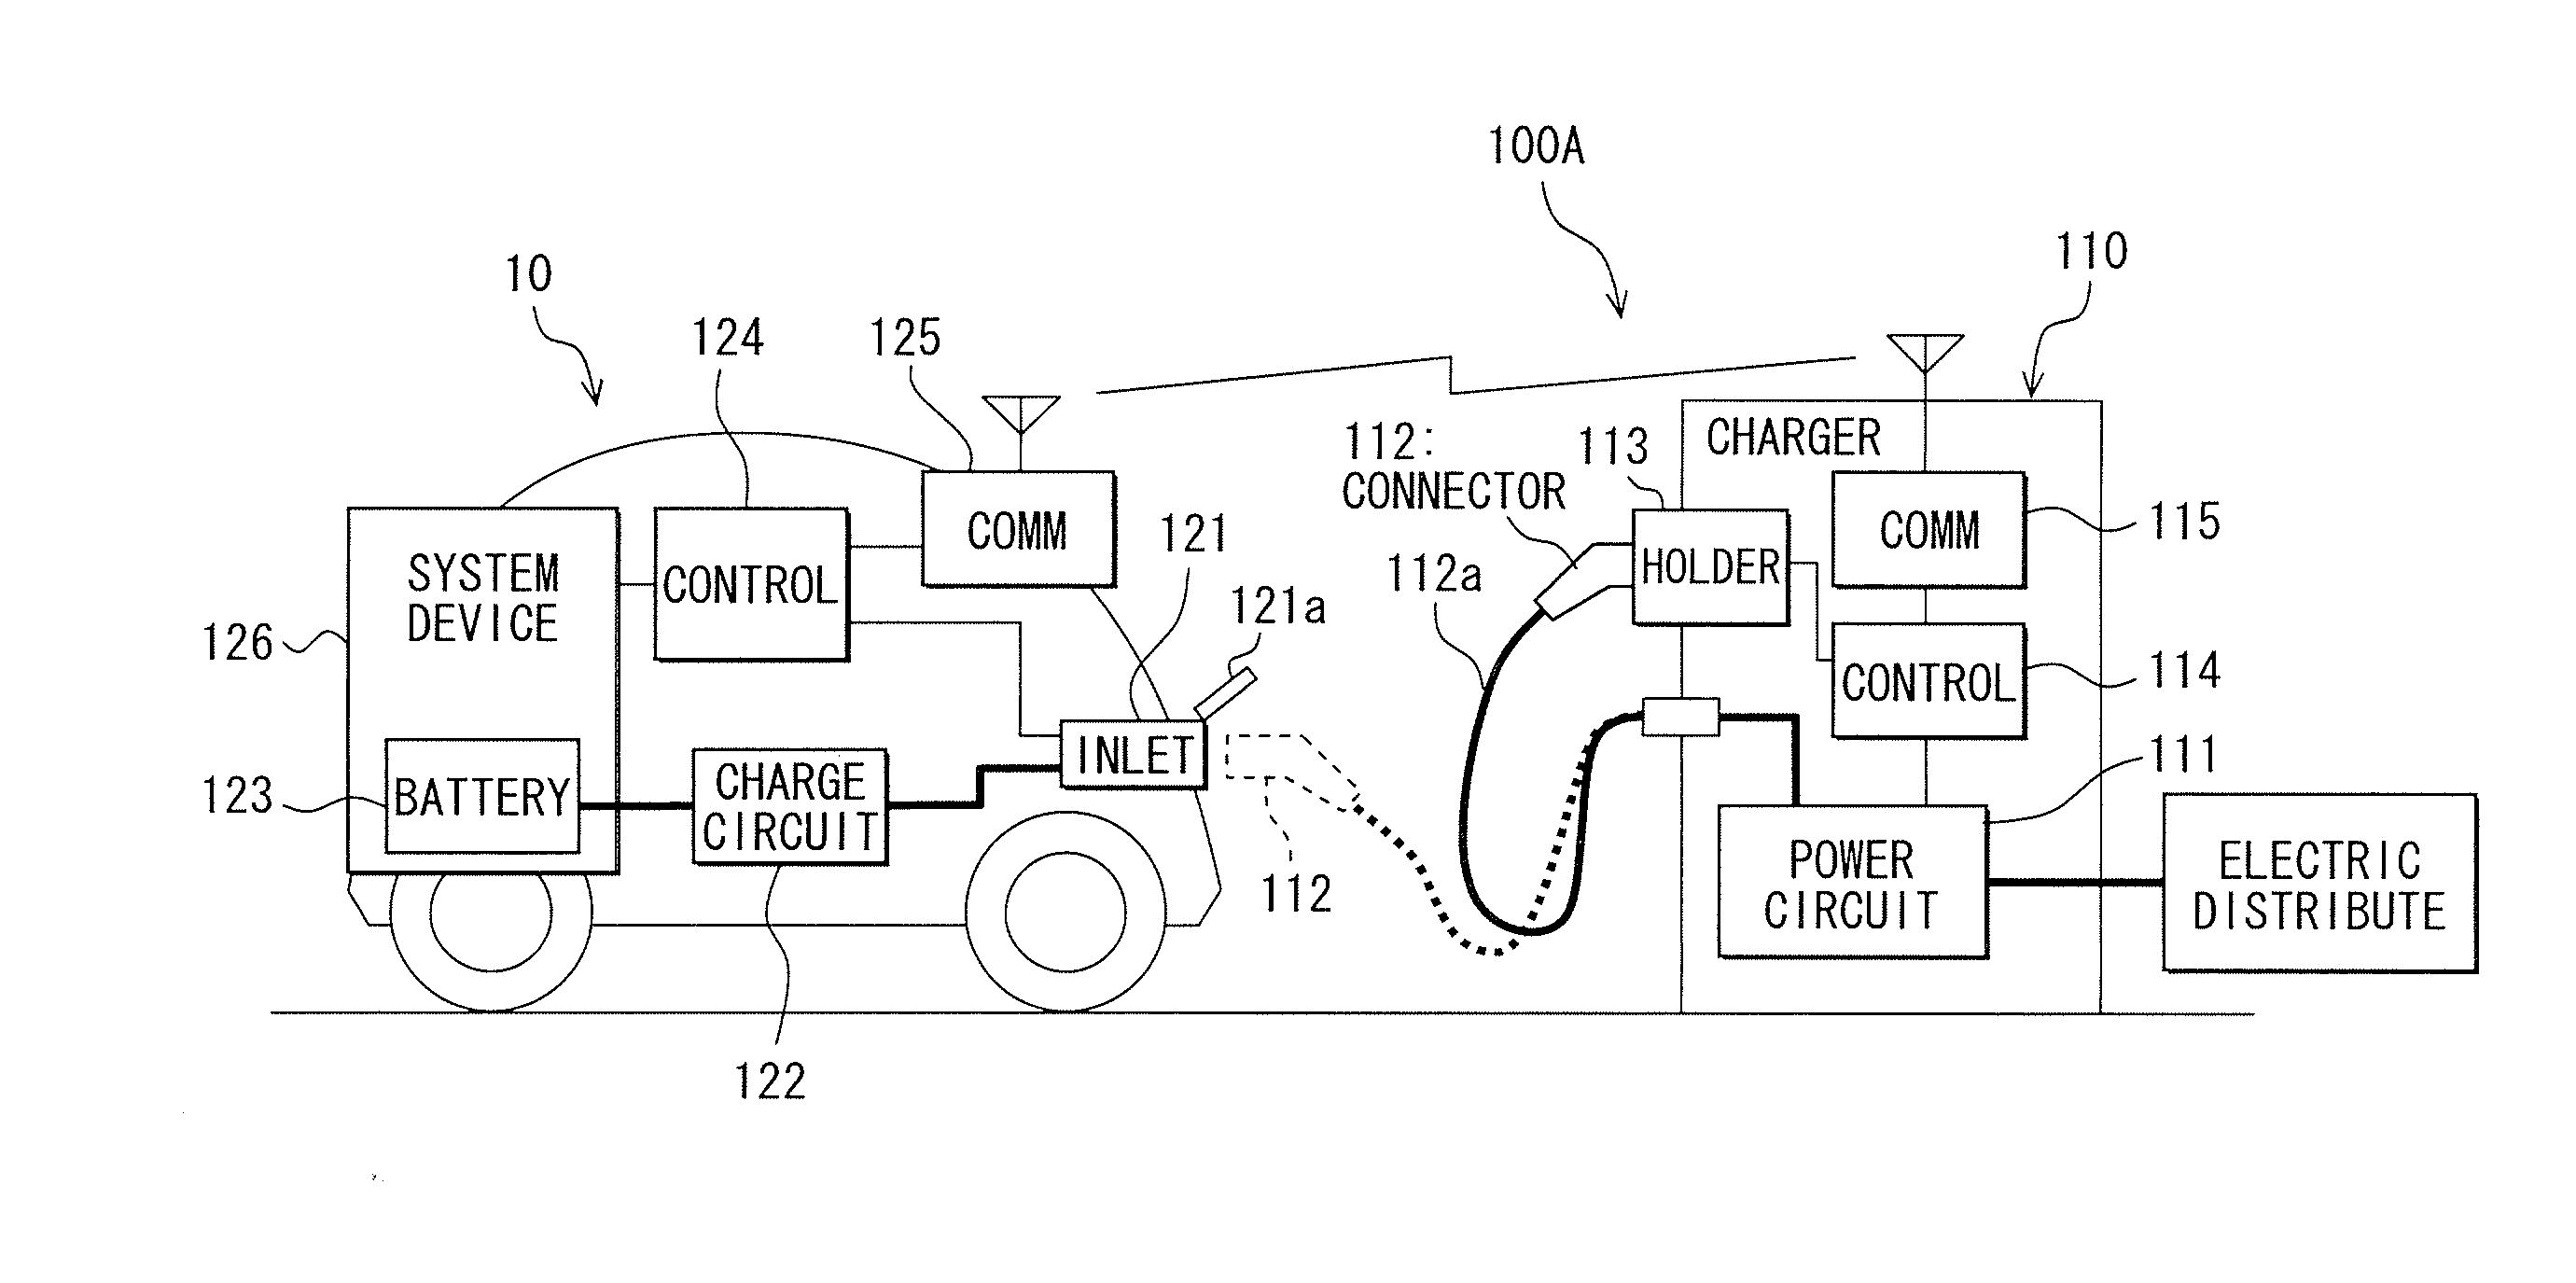 Vehicular charge apparatus